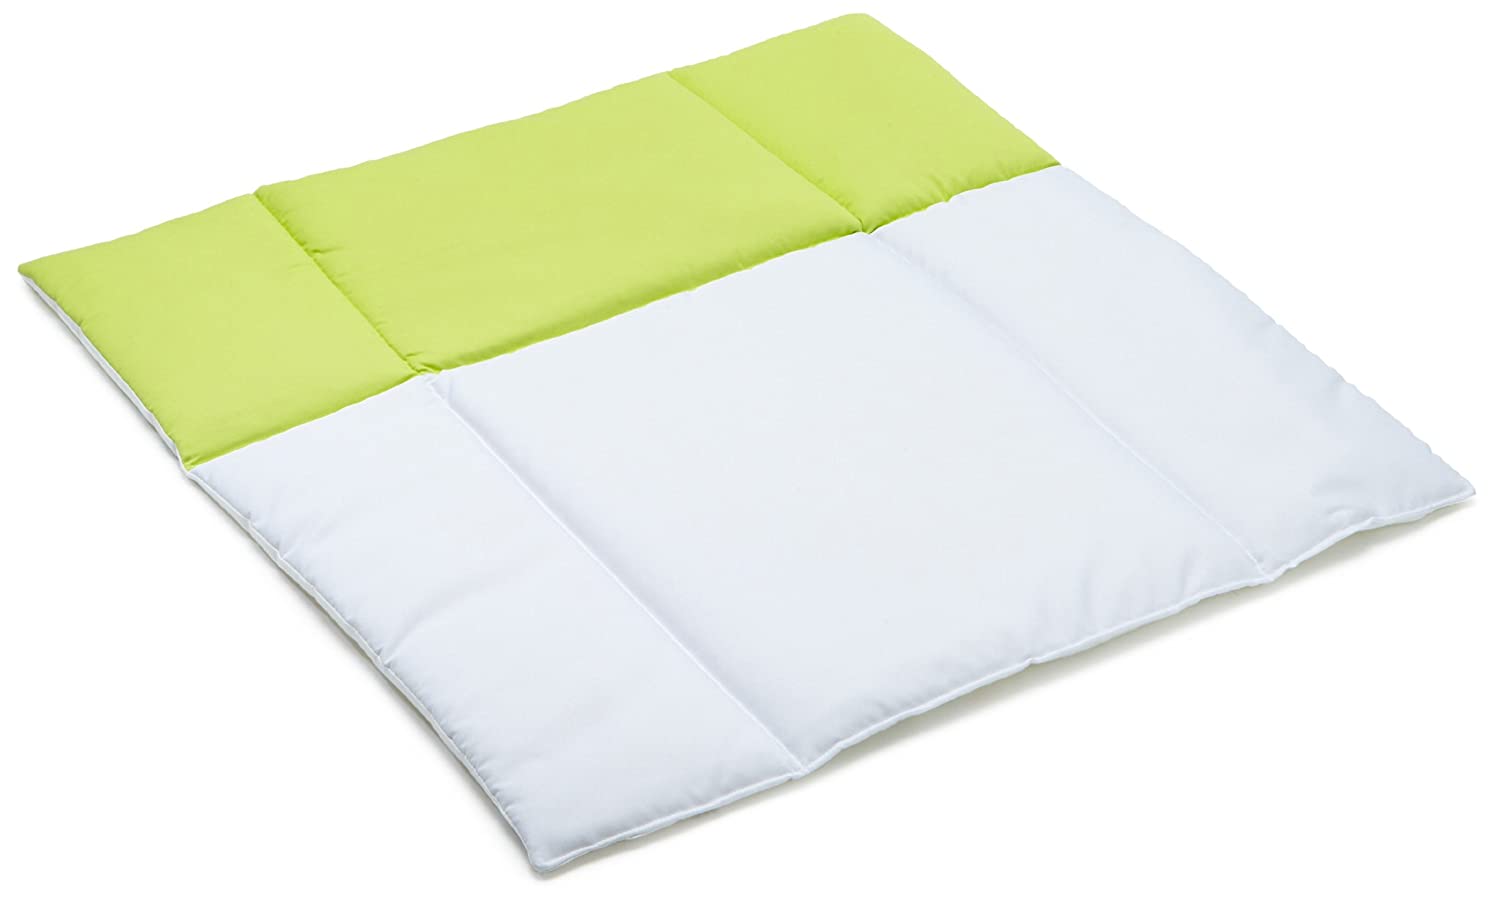 Christiane Wegner Bennie 0331 02-106 Changing Mat PE Fabric Washable and Wipeable Tear-Resistant PVC-Free 80 x 75 cm